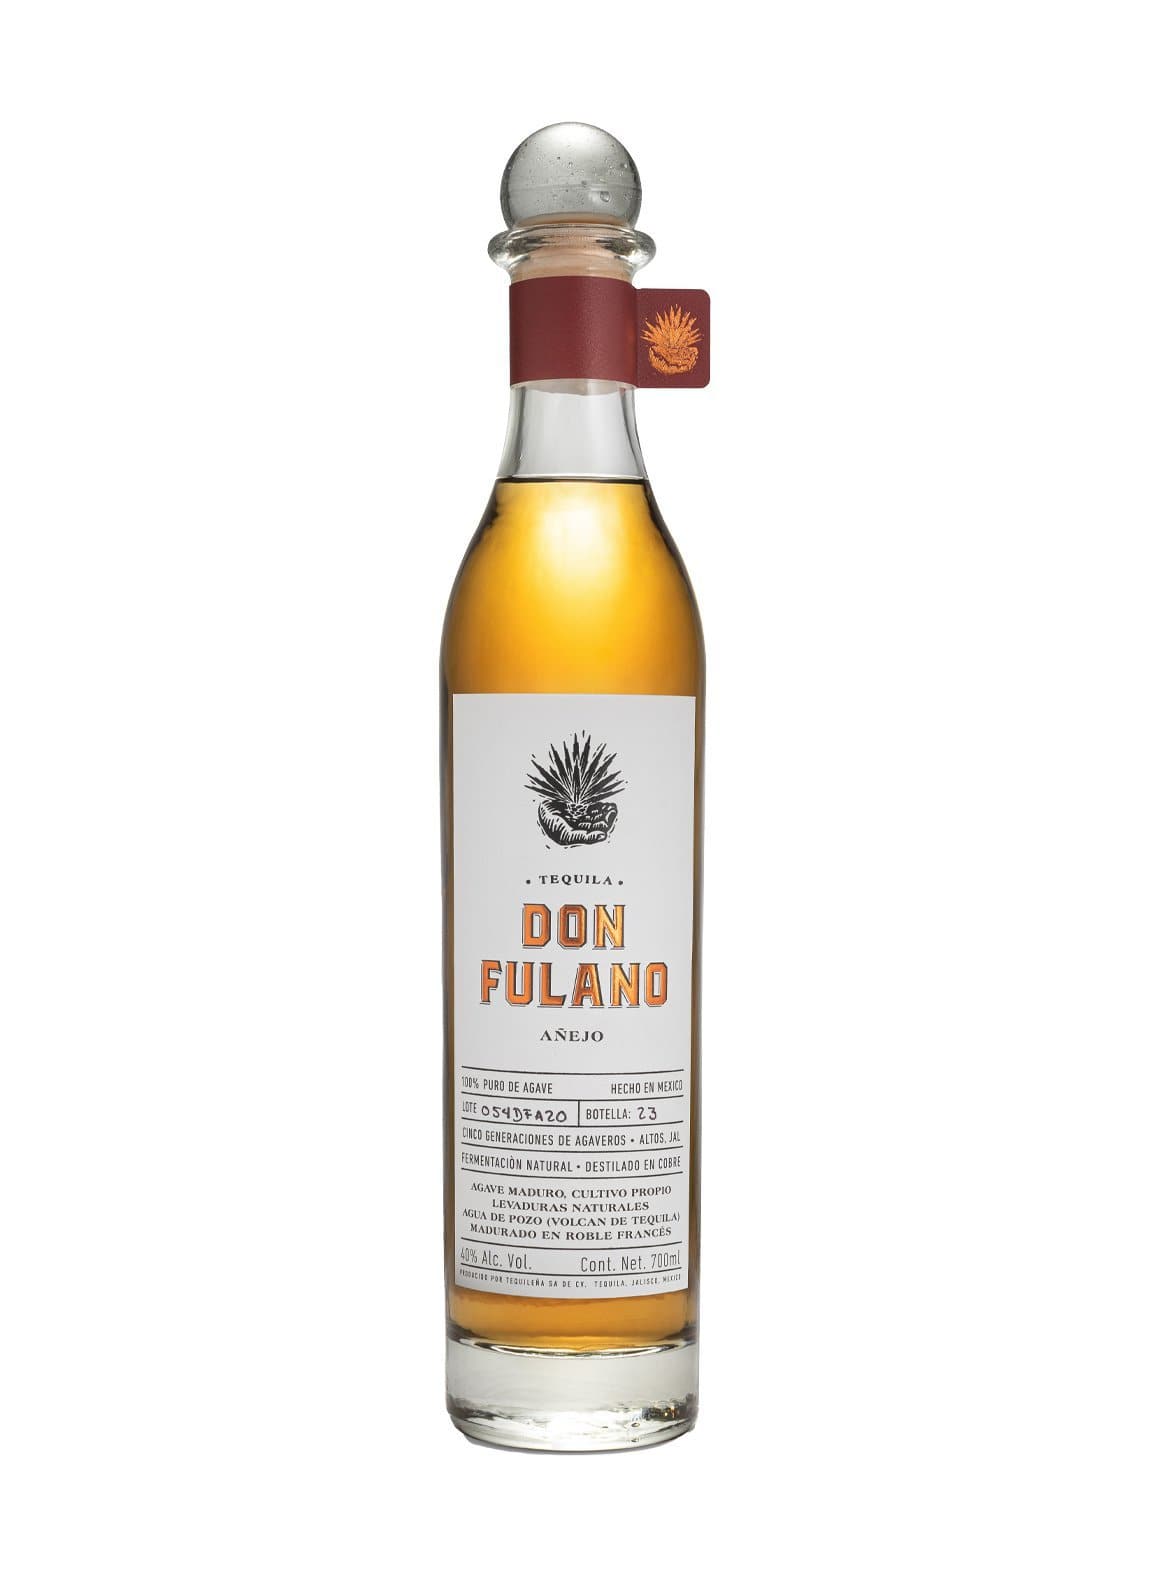 Don Fulano A–ejo Tequila 40% 700ml | Tequila | Shop online at Spirits of France